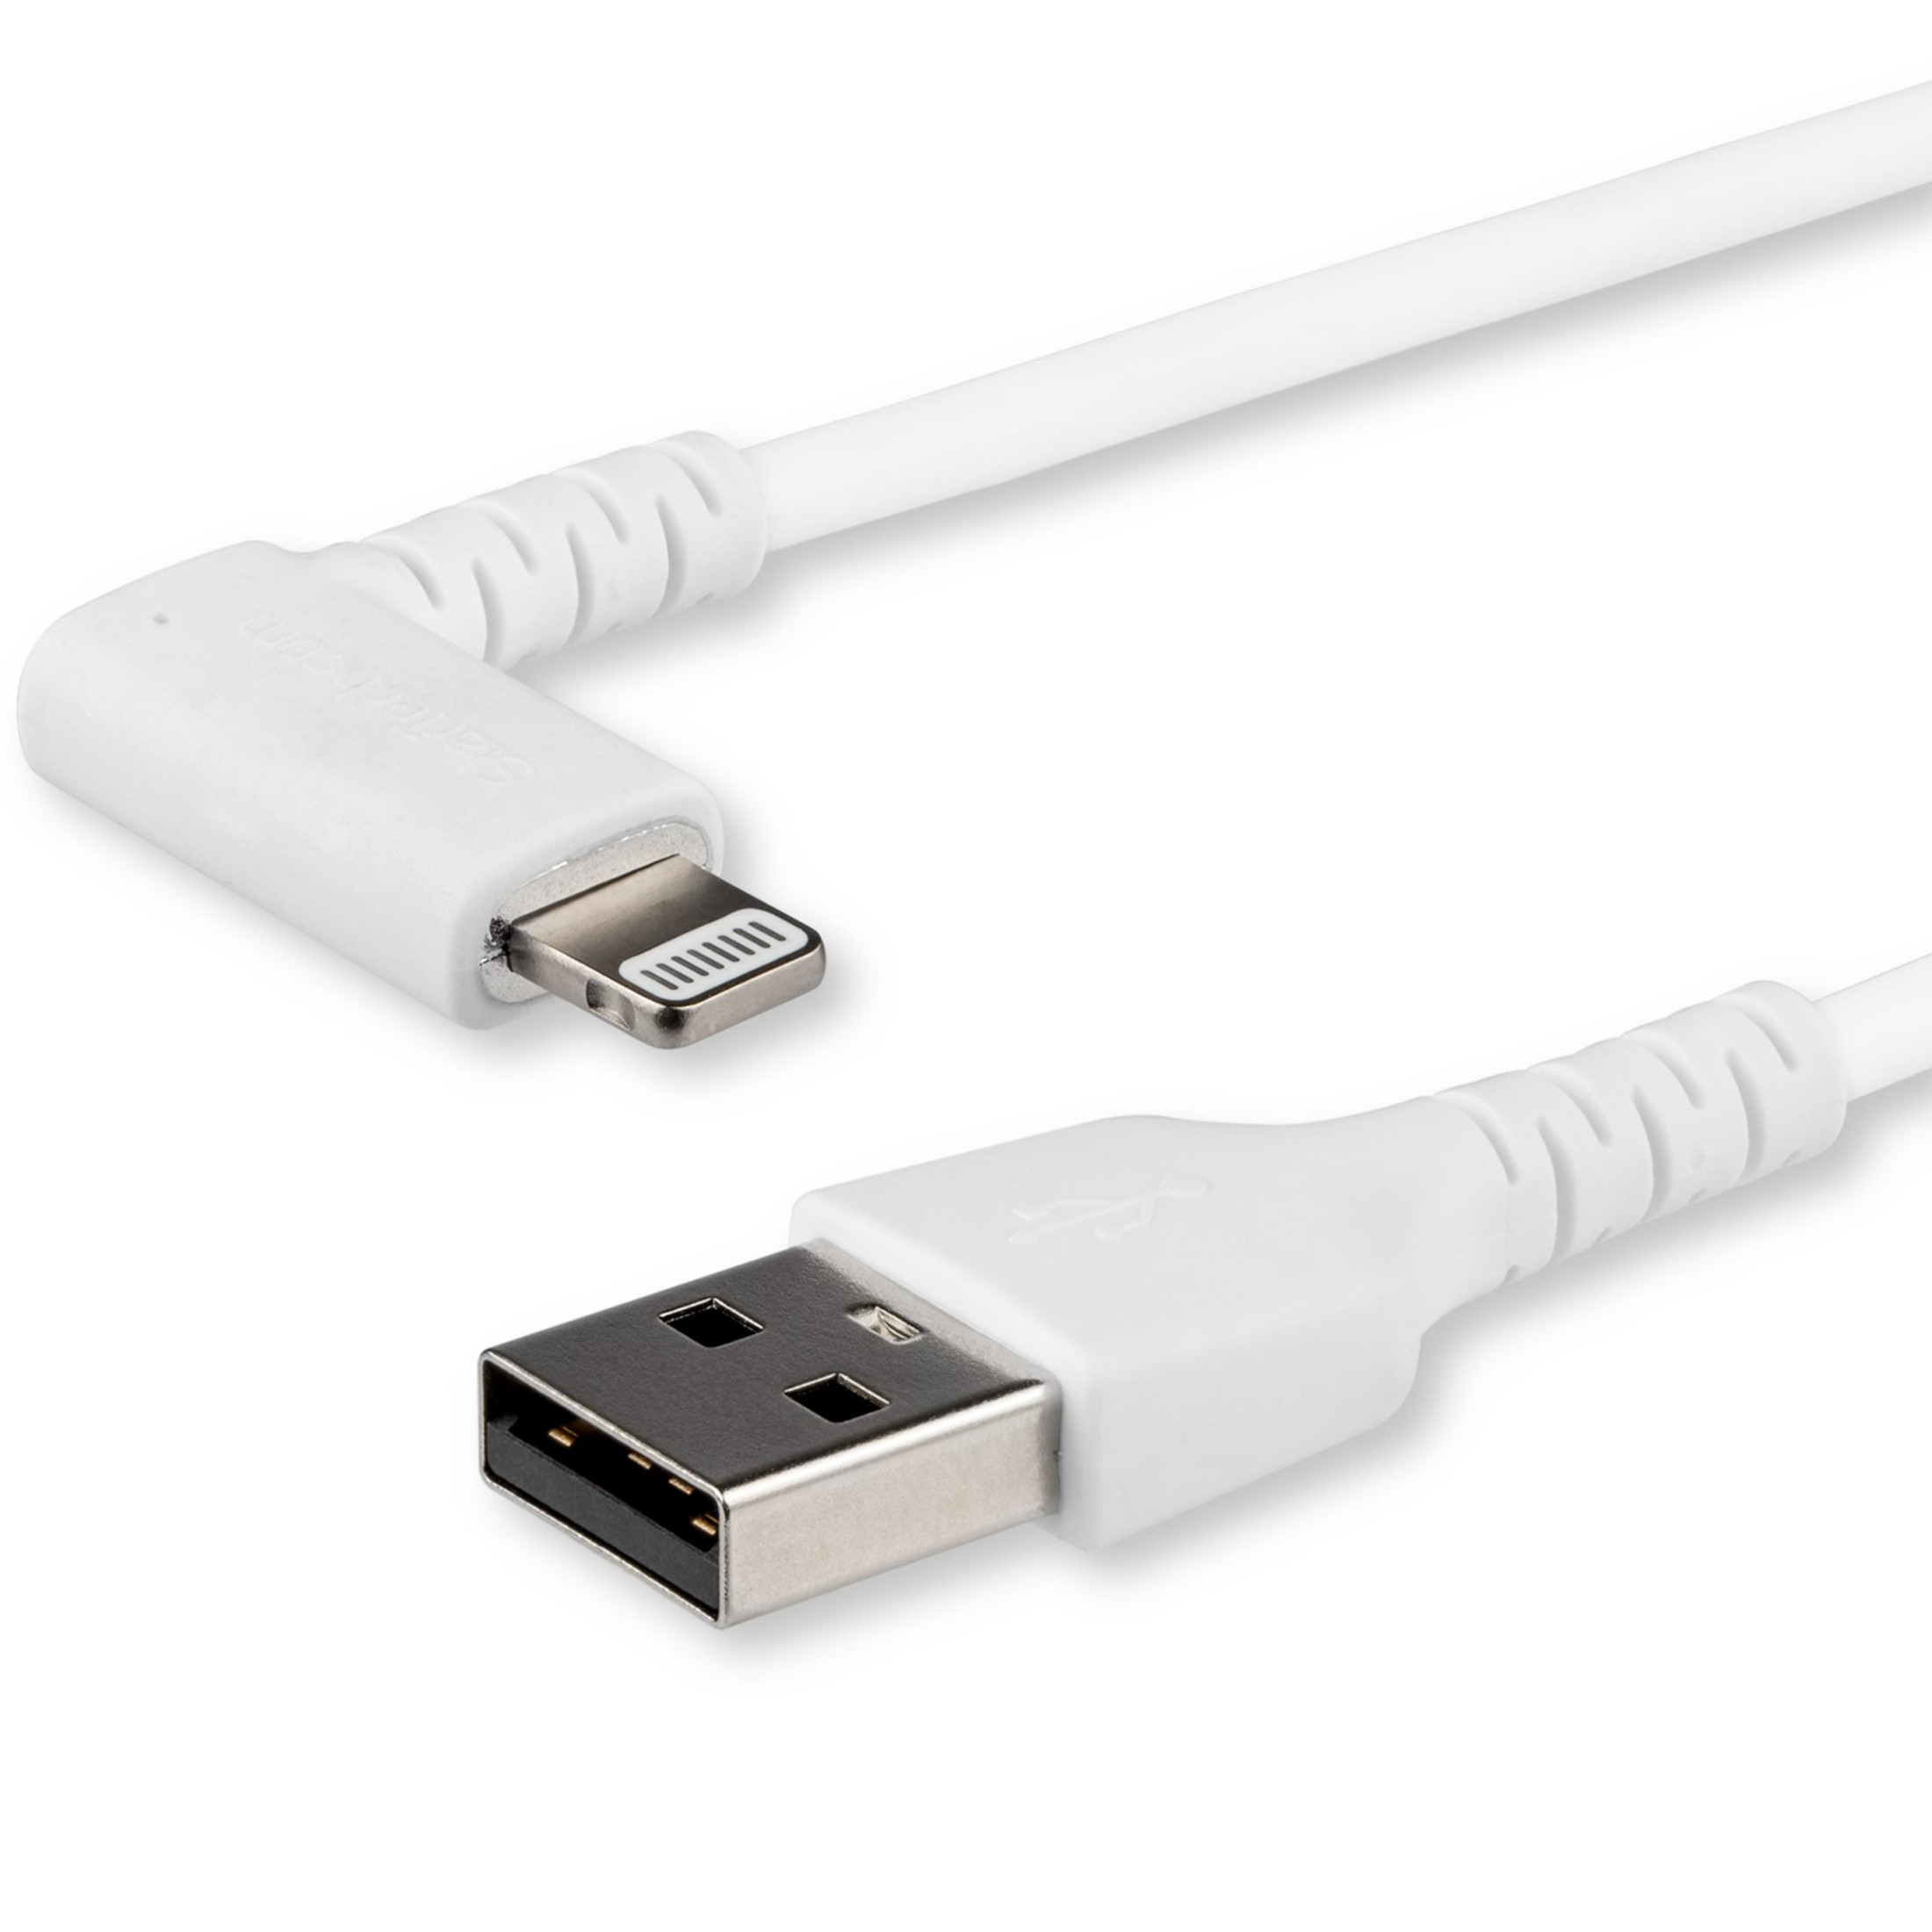 Startech .com 2m USB A to Lightning Cable iPhone iPad Durable Right Angled  90 Degree White Charger Cord w/Aramid Fiber Apple MFI Certified -  RUSBLTMM2MWR - Corporate Armor